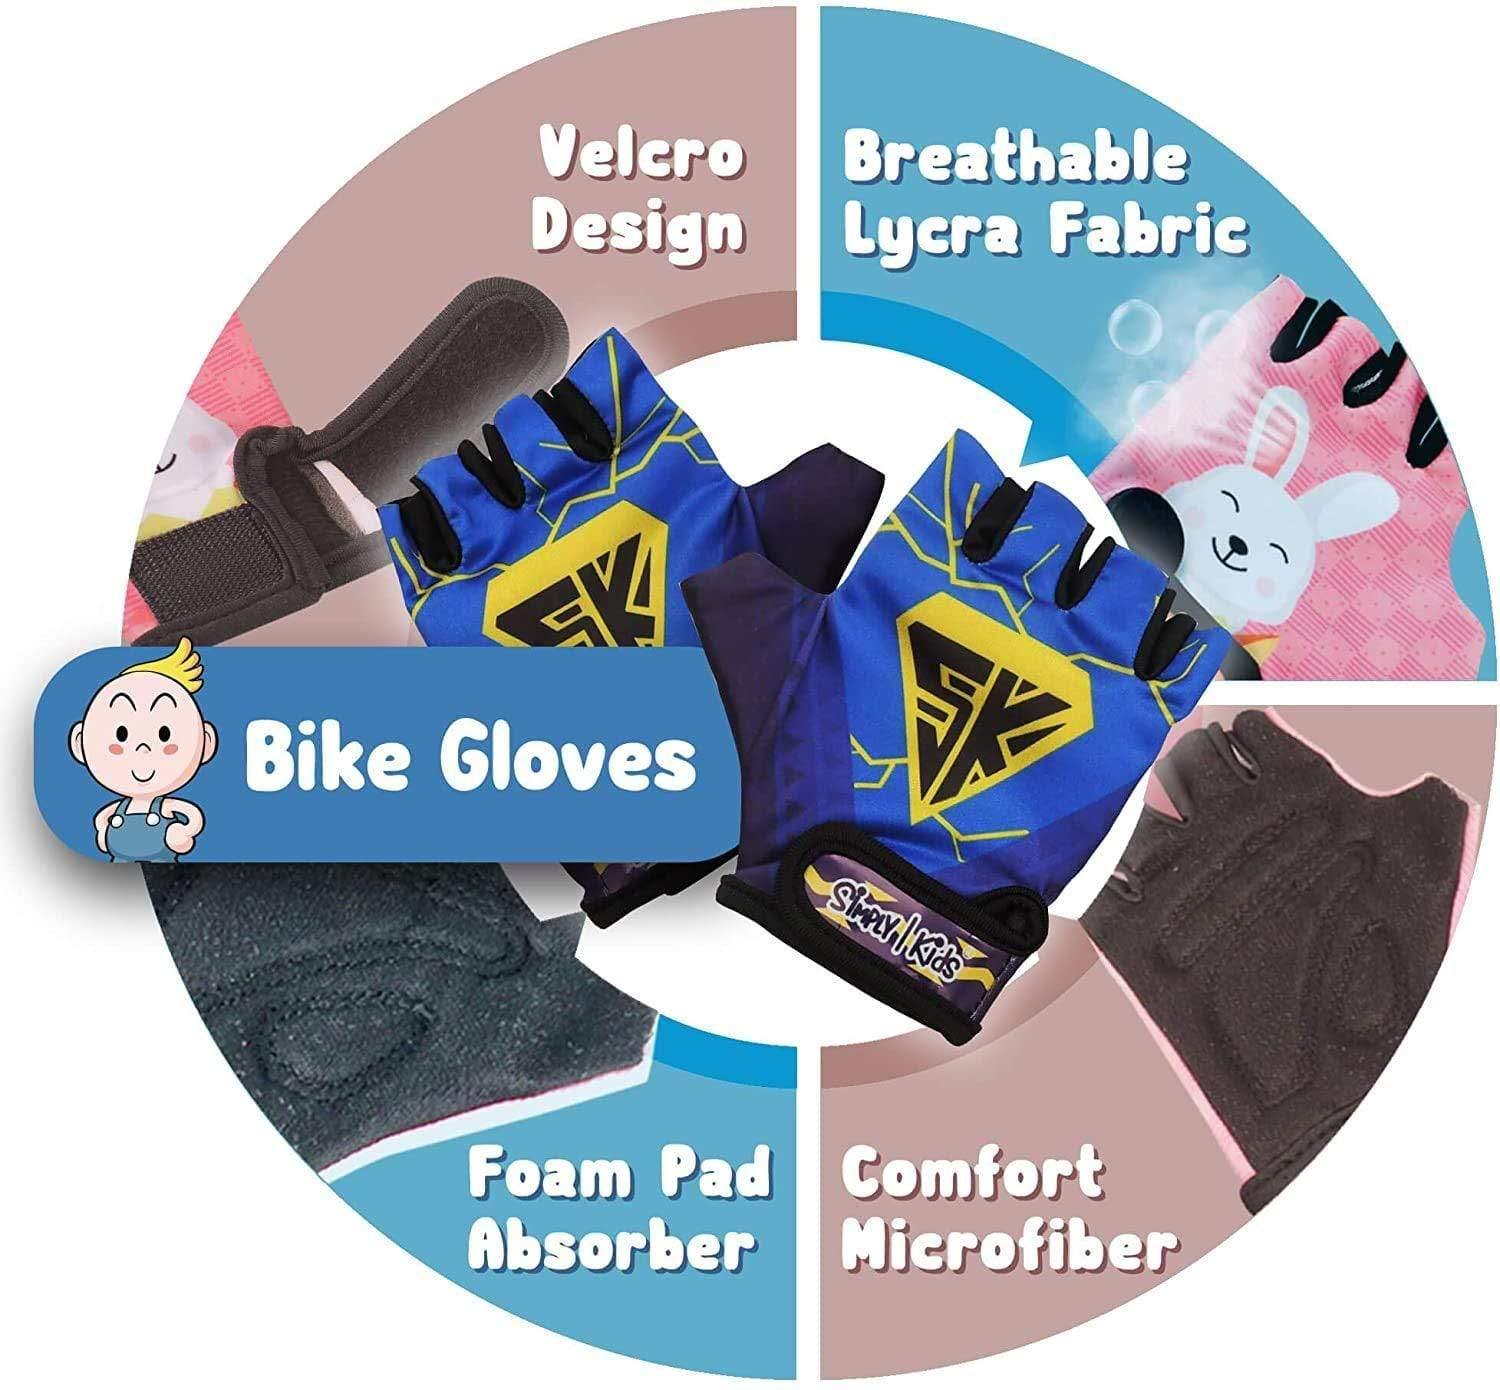 [1st Gen.] Innovative Soft Kids Elbow and Knee Pads with Bike Gloves (The Flash)